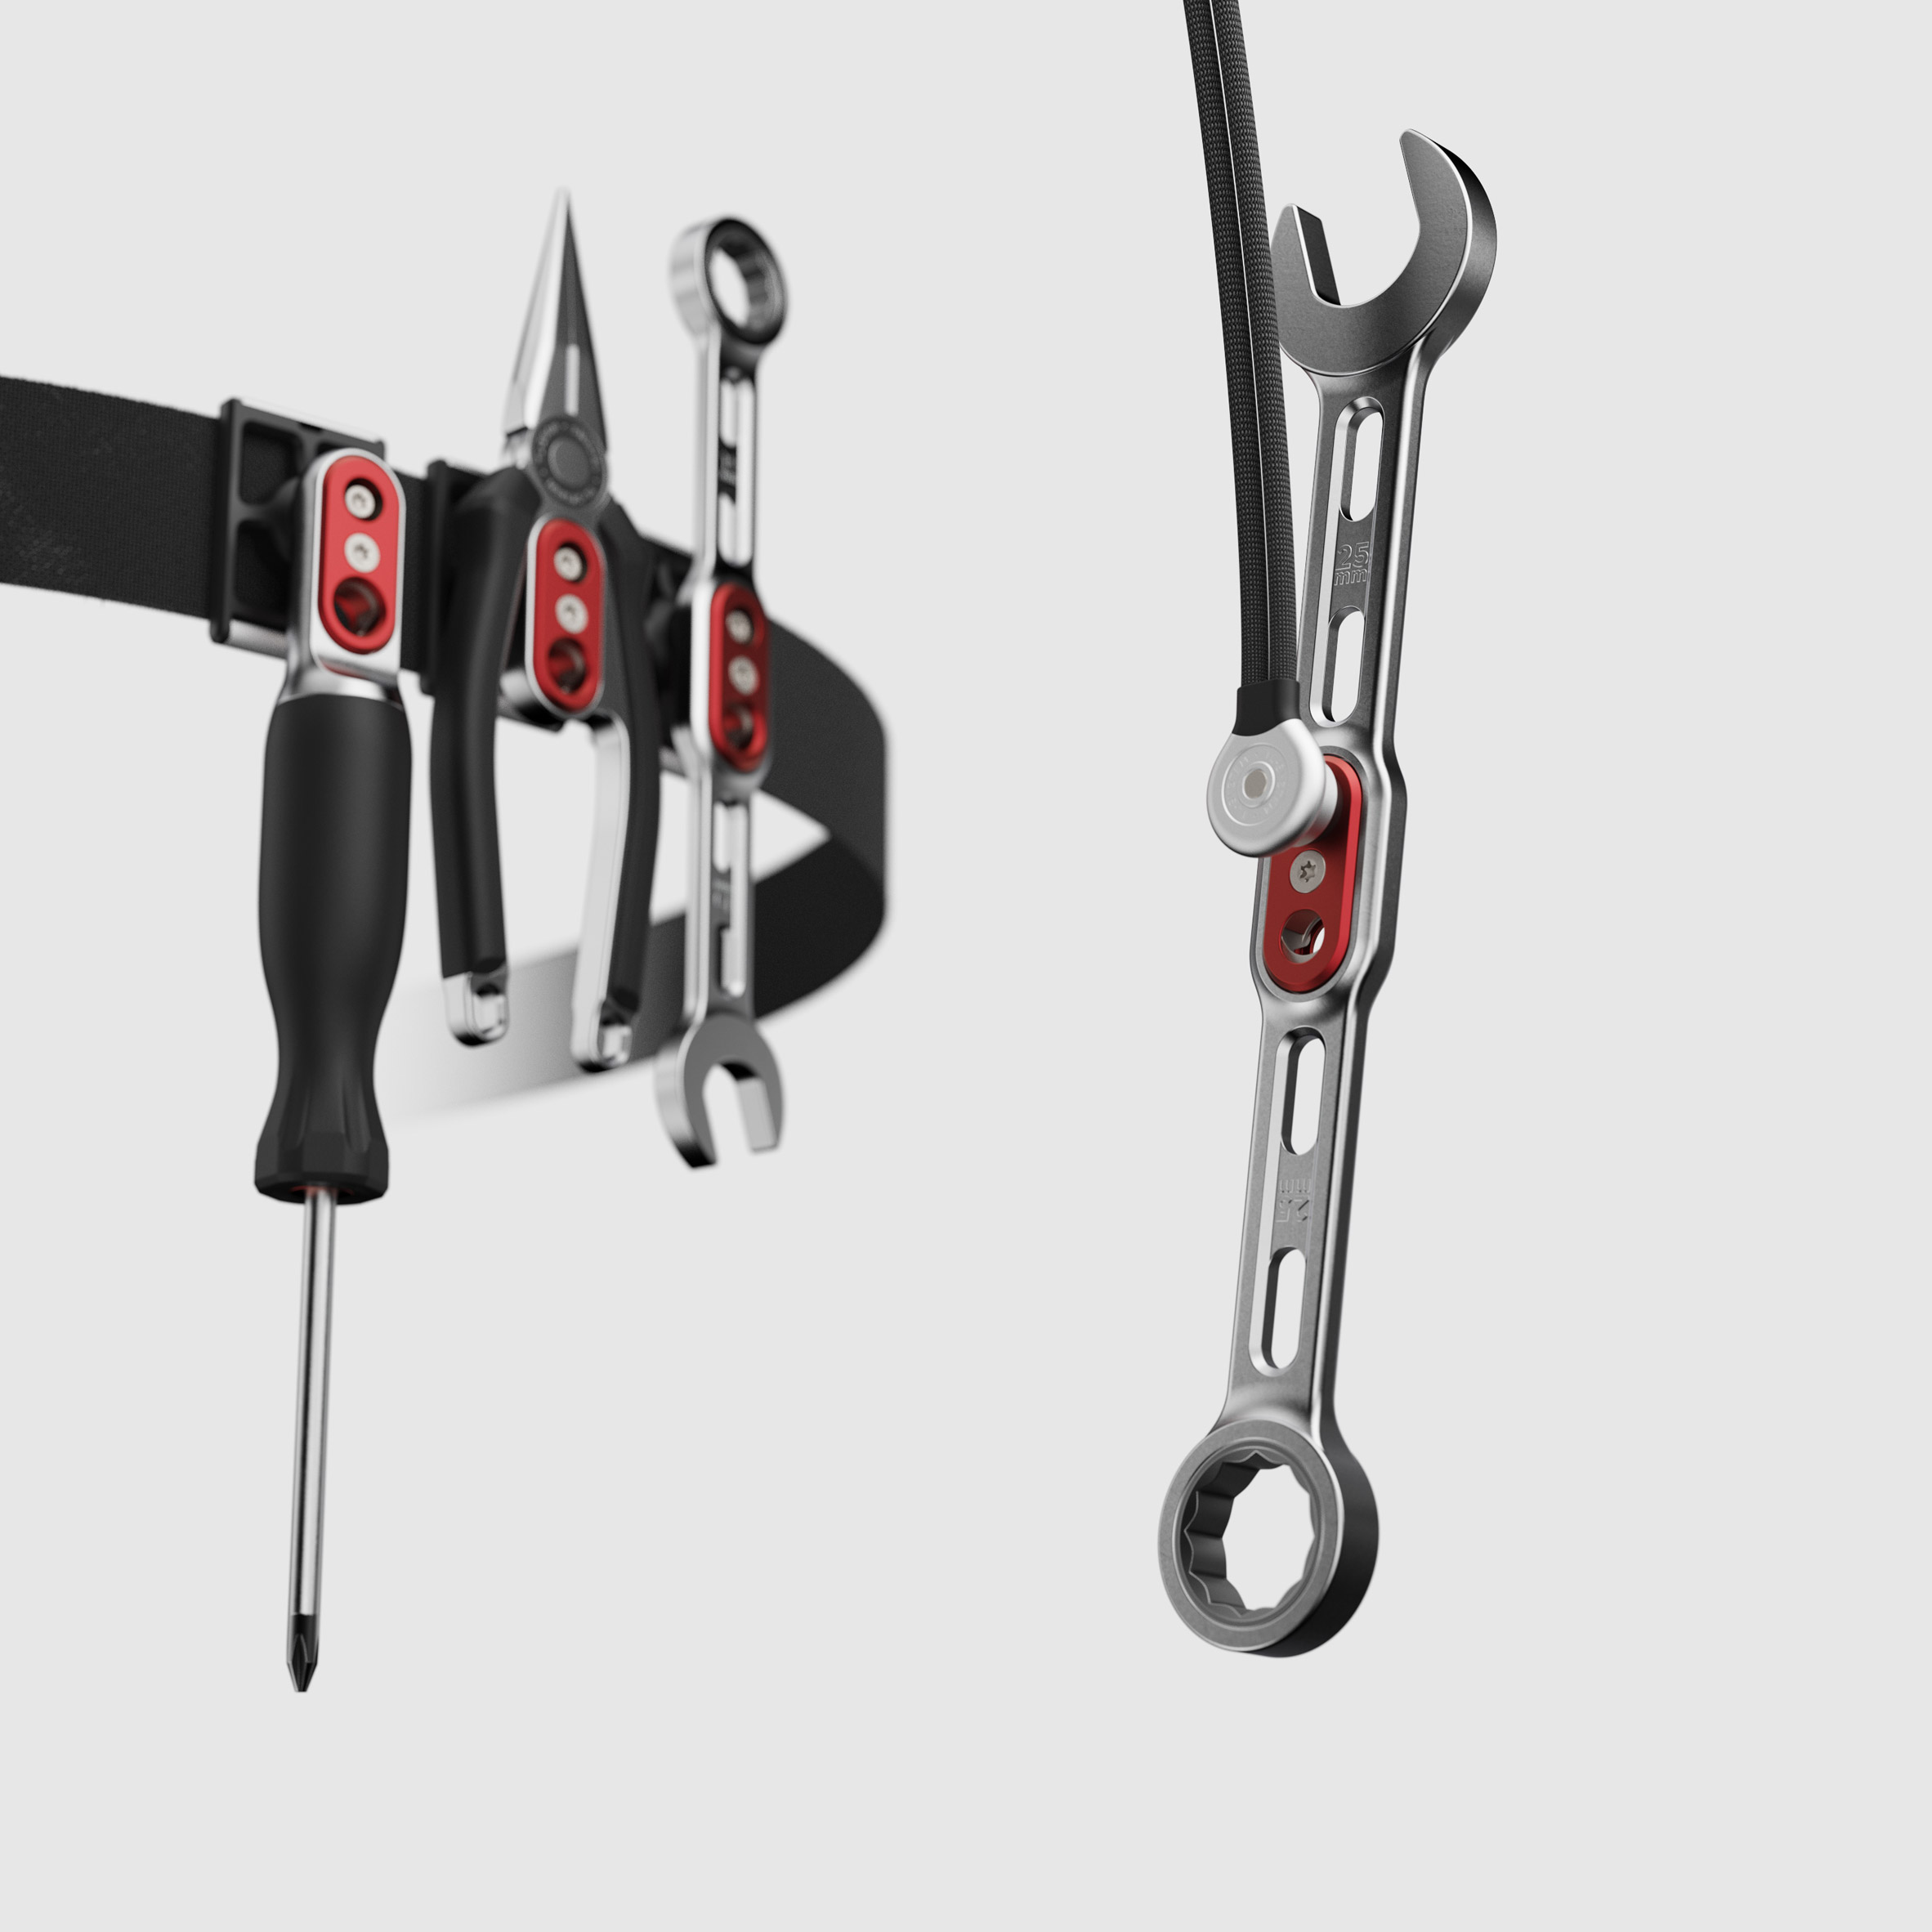 Tethering tool for climbing with different tools attached